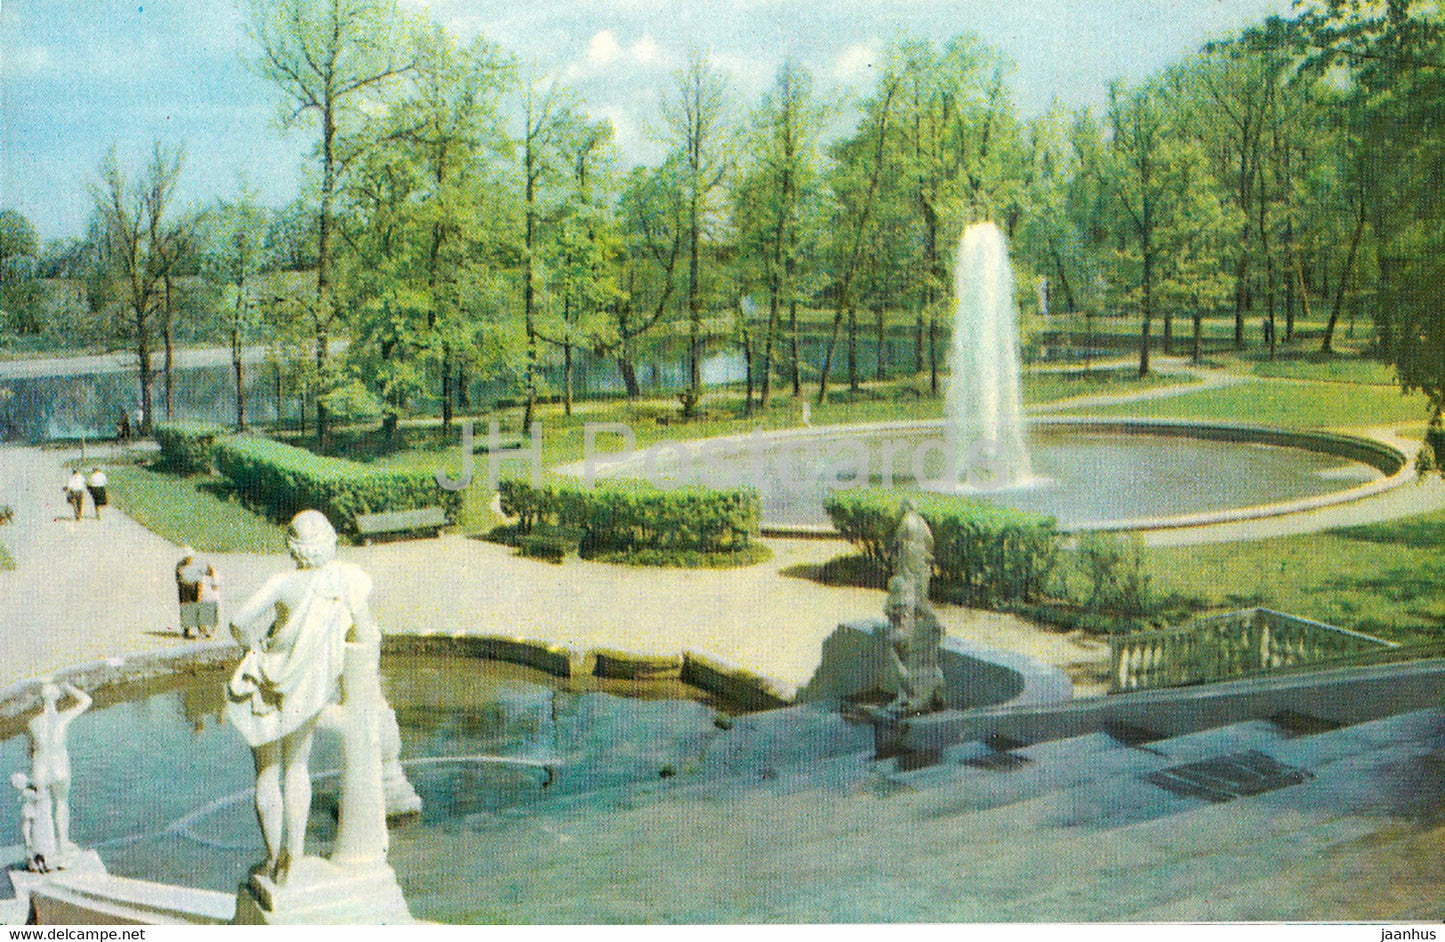 Petrodvorets - View of Menagerie fountain from the Marly cascade - 1966 - Russia USSR - unused - JH Postcards